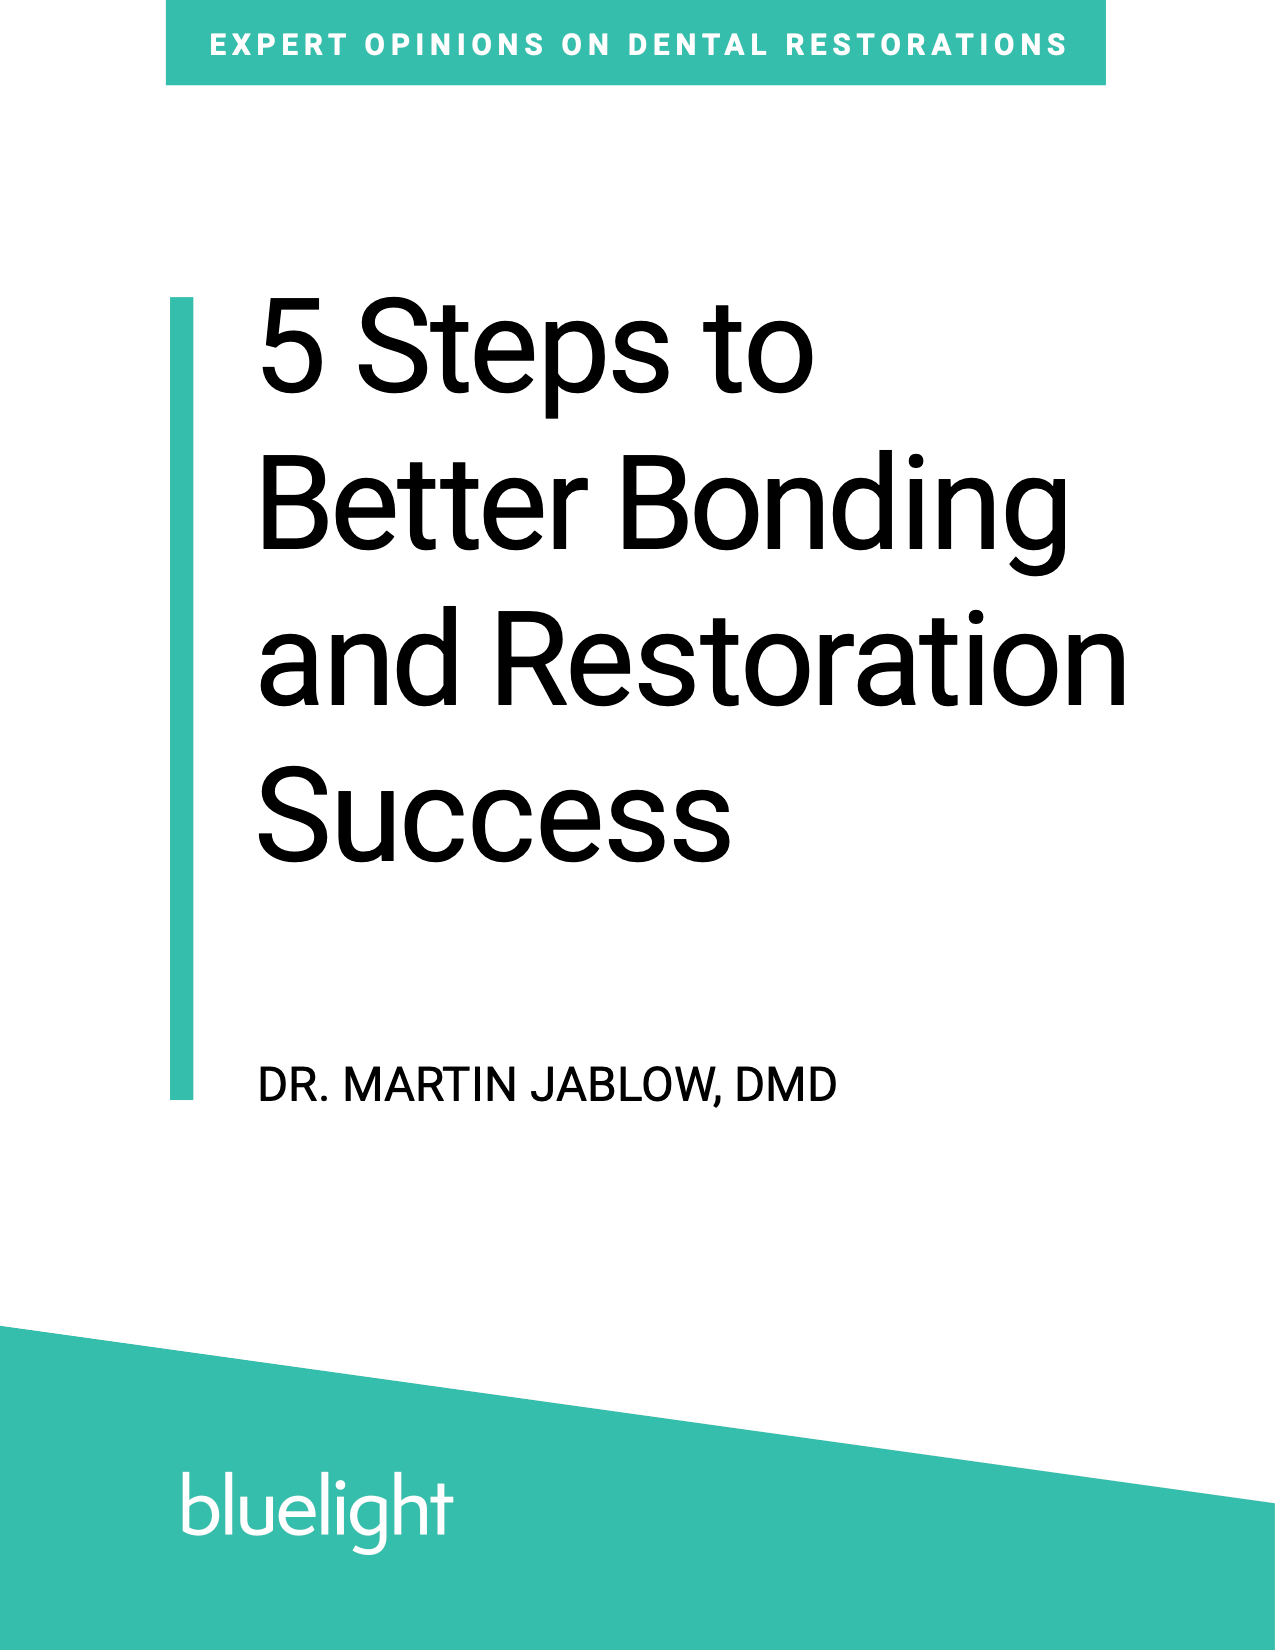 5 Steps to Better Bonding and Restoration Success